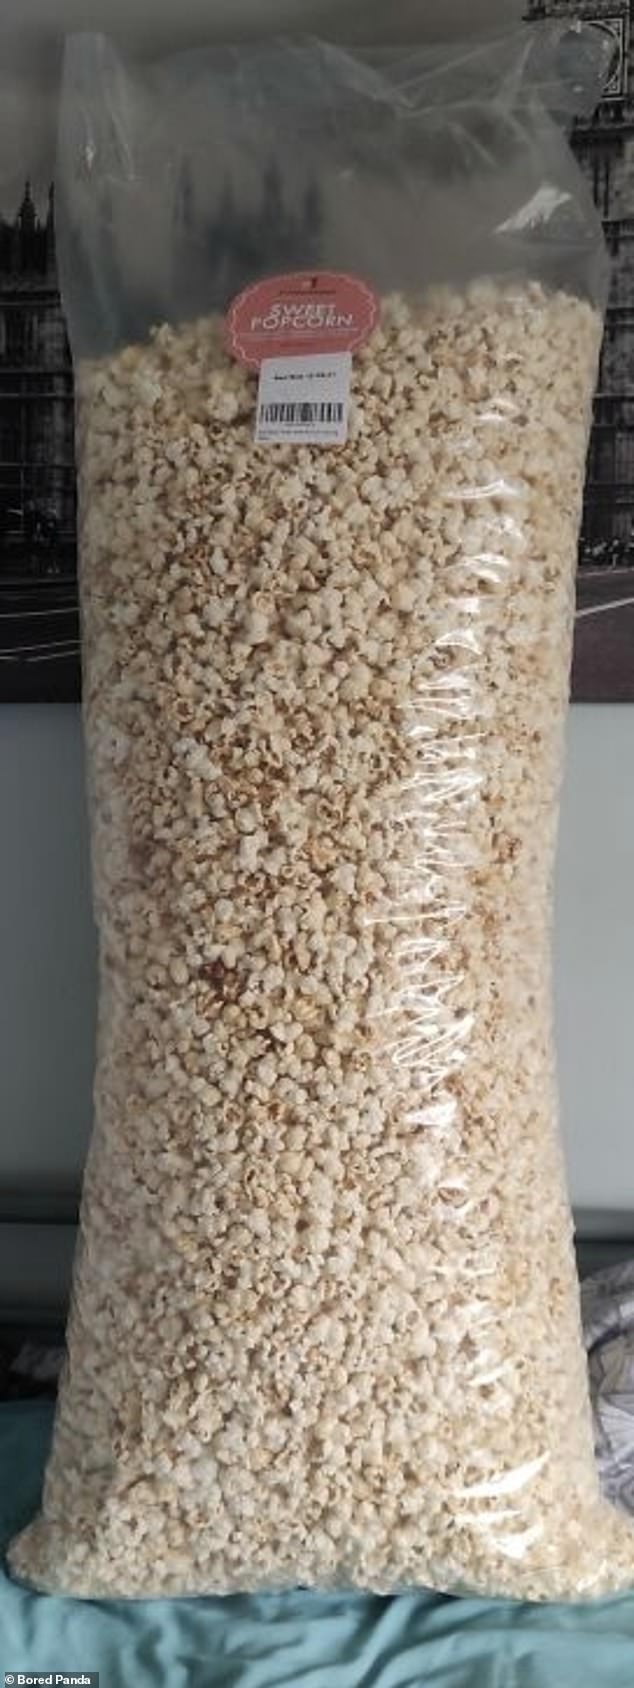 MASSIVE PORTION: Elsewhere, a university student in the UK was delighted when he received the giant portion of popcorn he had ordered on Amazon.